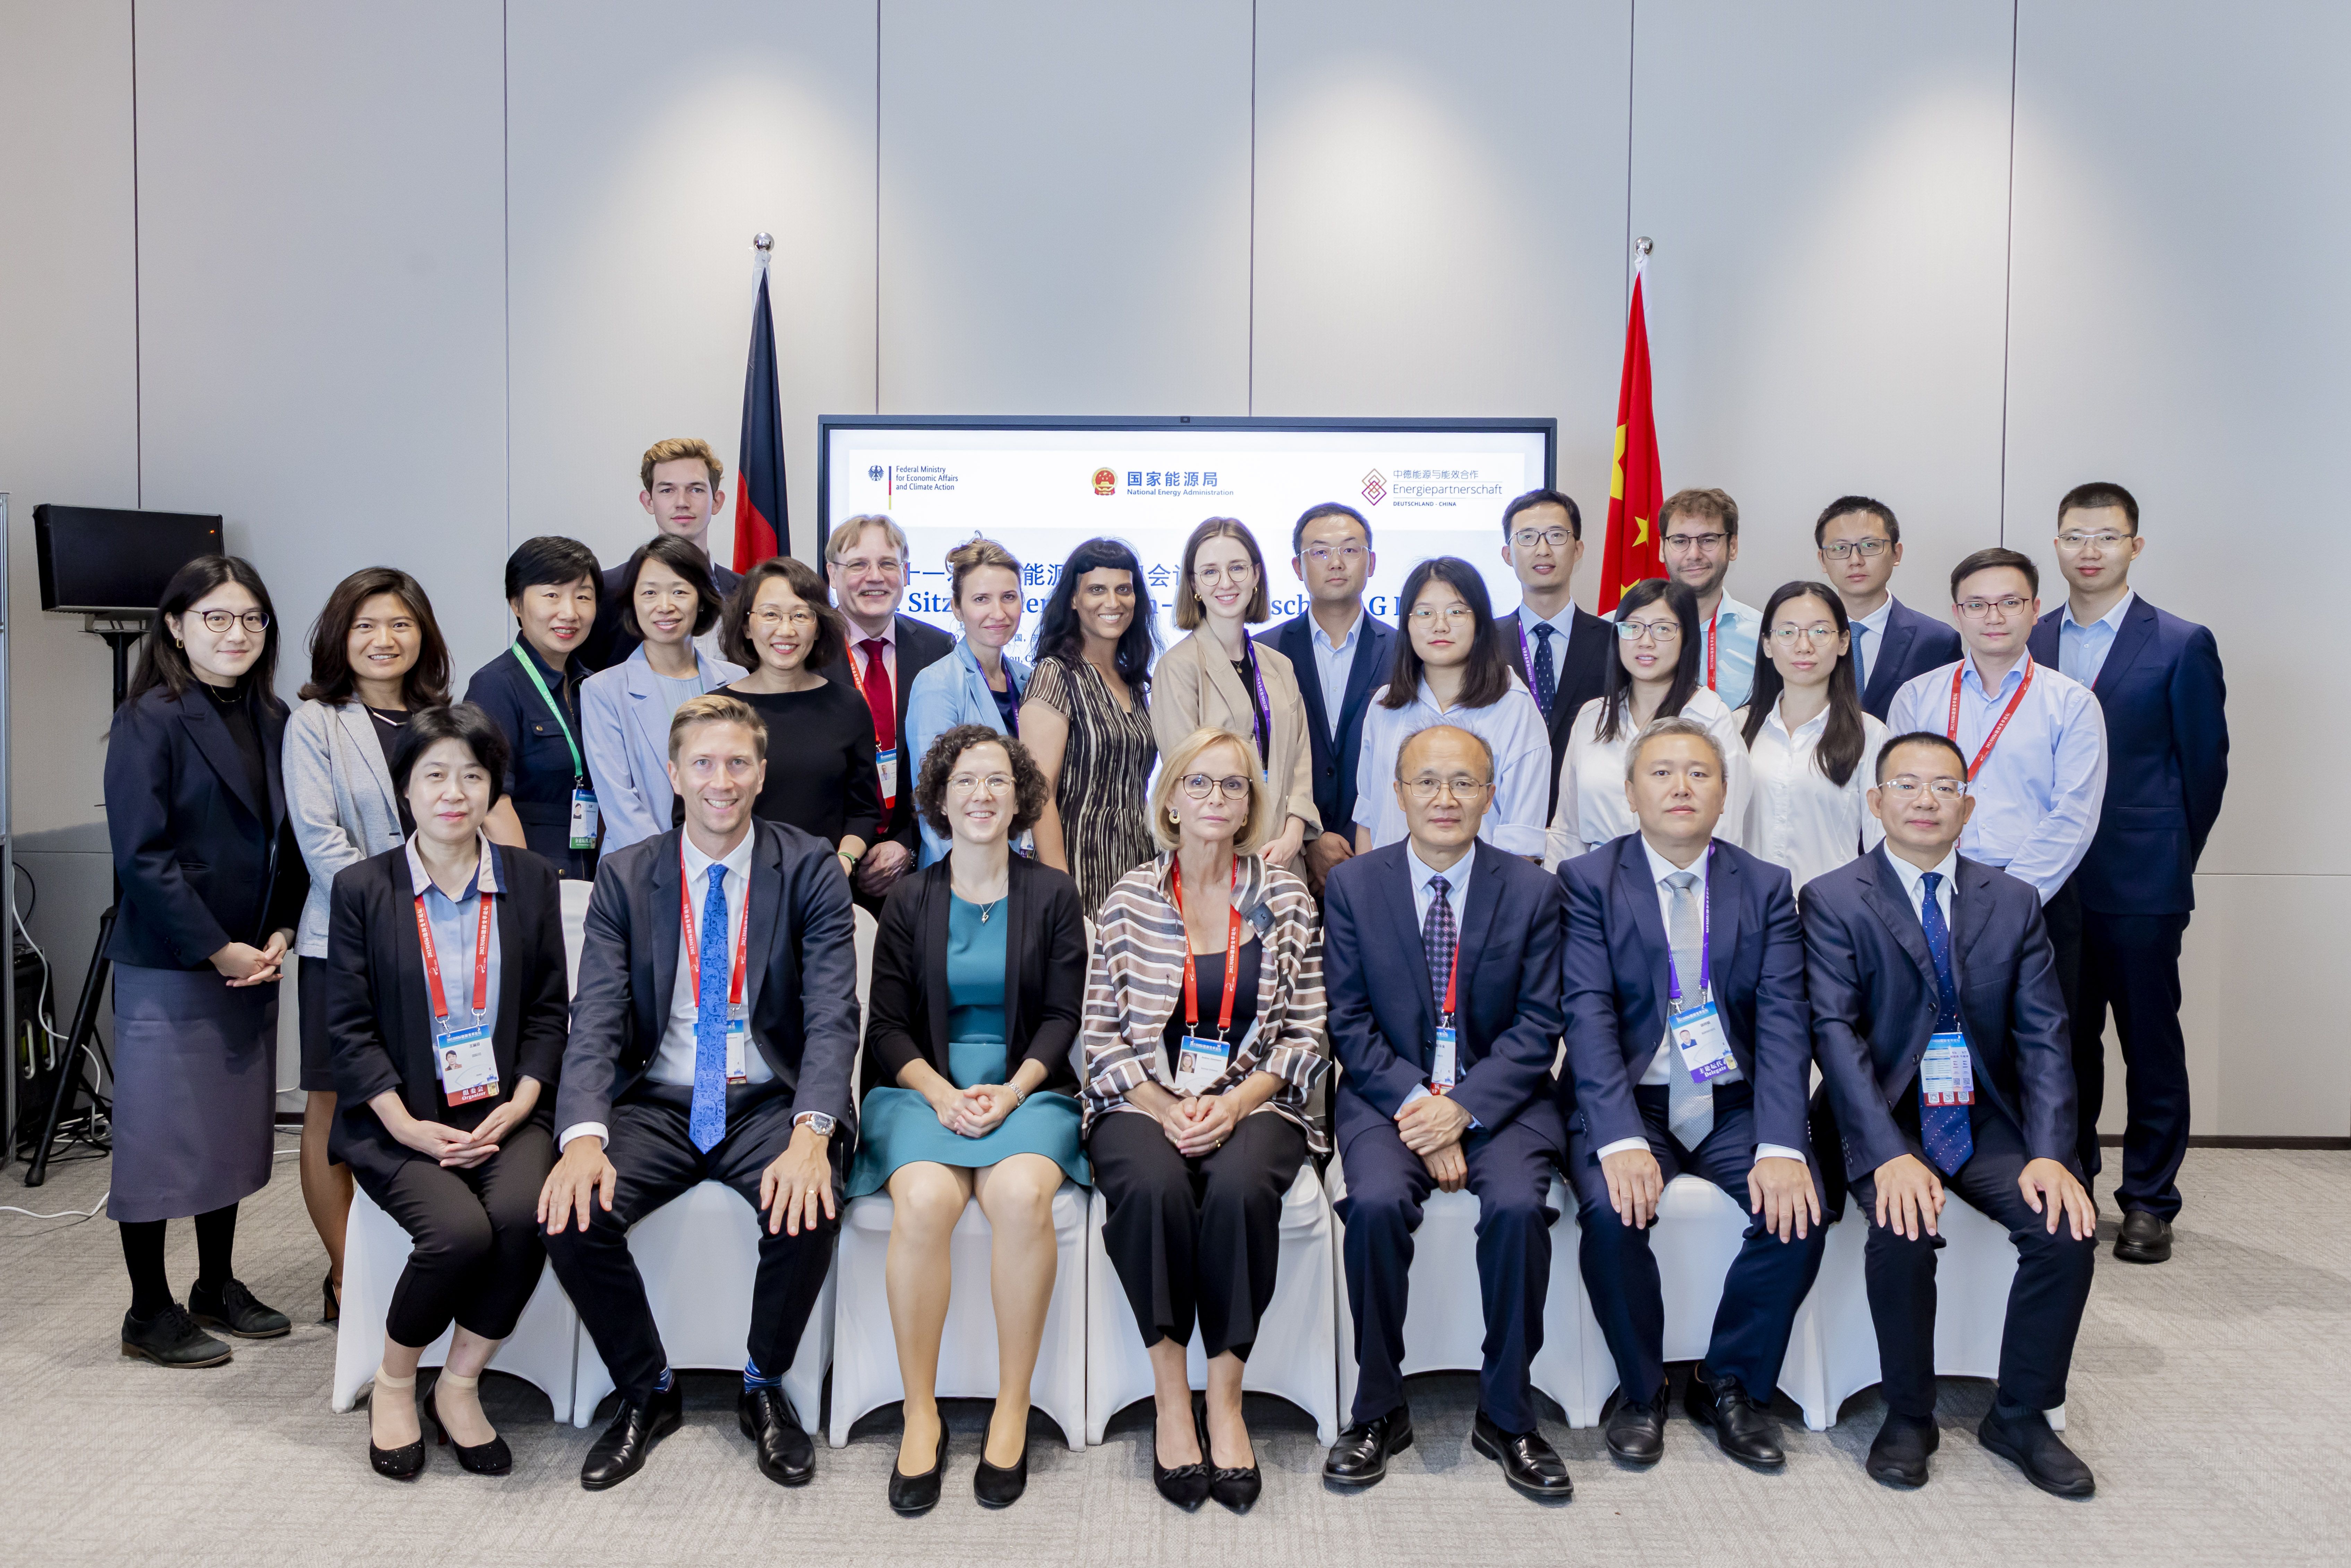 Participants of the 11st meeting of the Sino-German Working Group on Energy